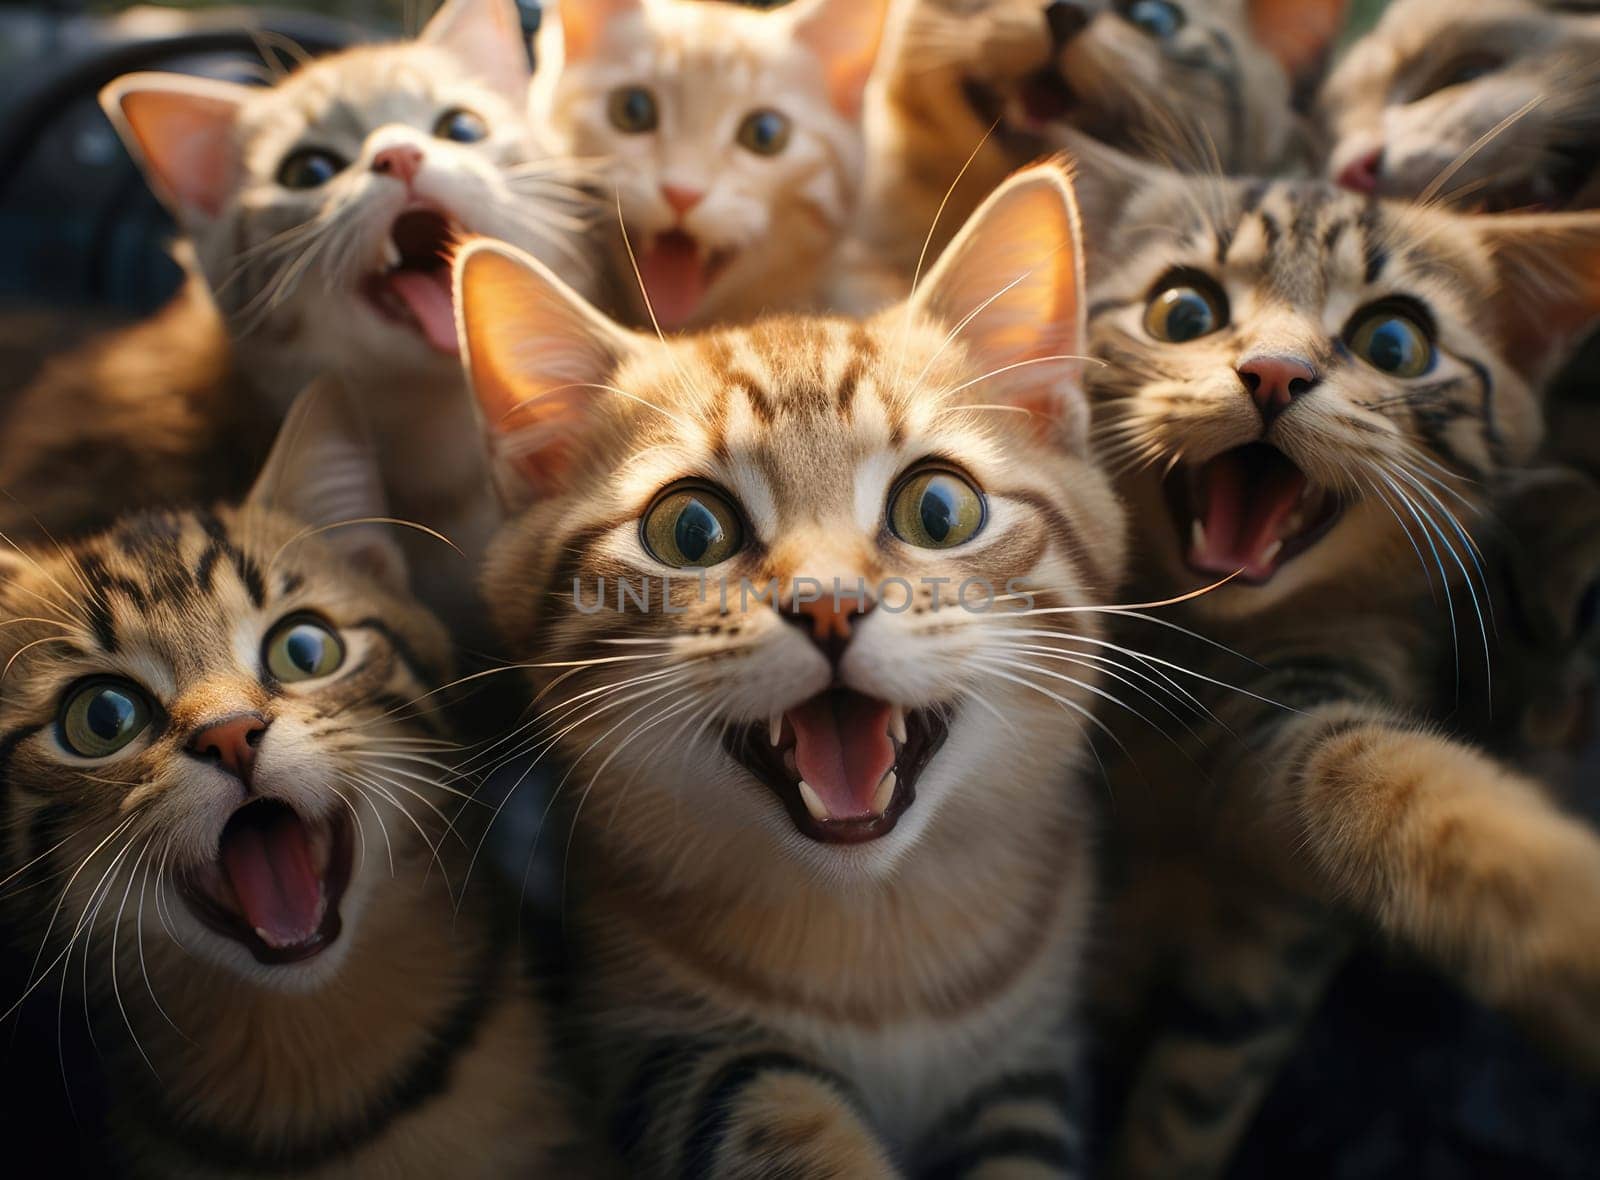 Several cats take a group selfie. Everyone is looking at the camera